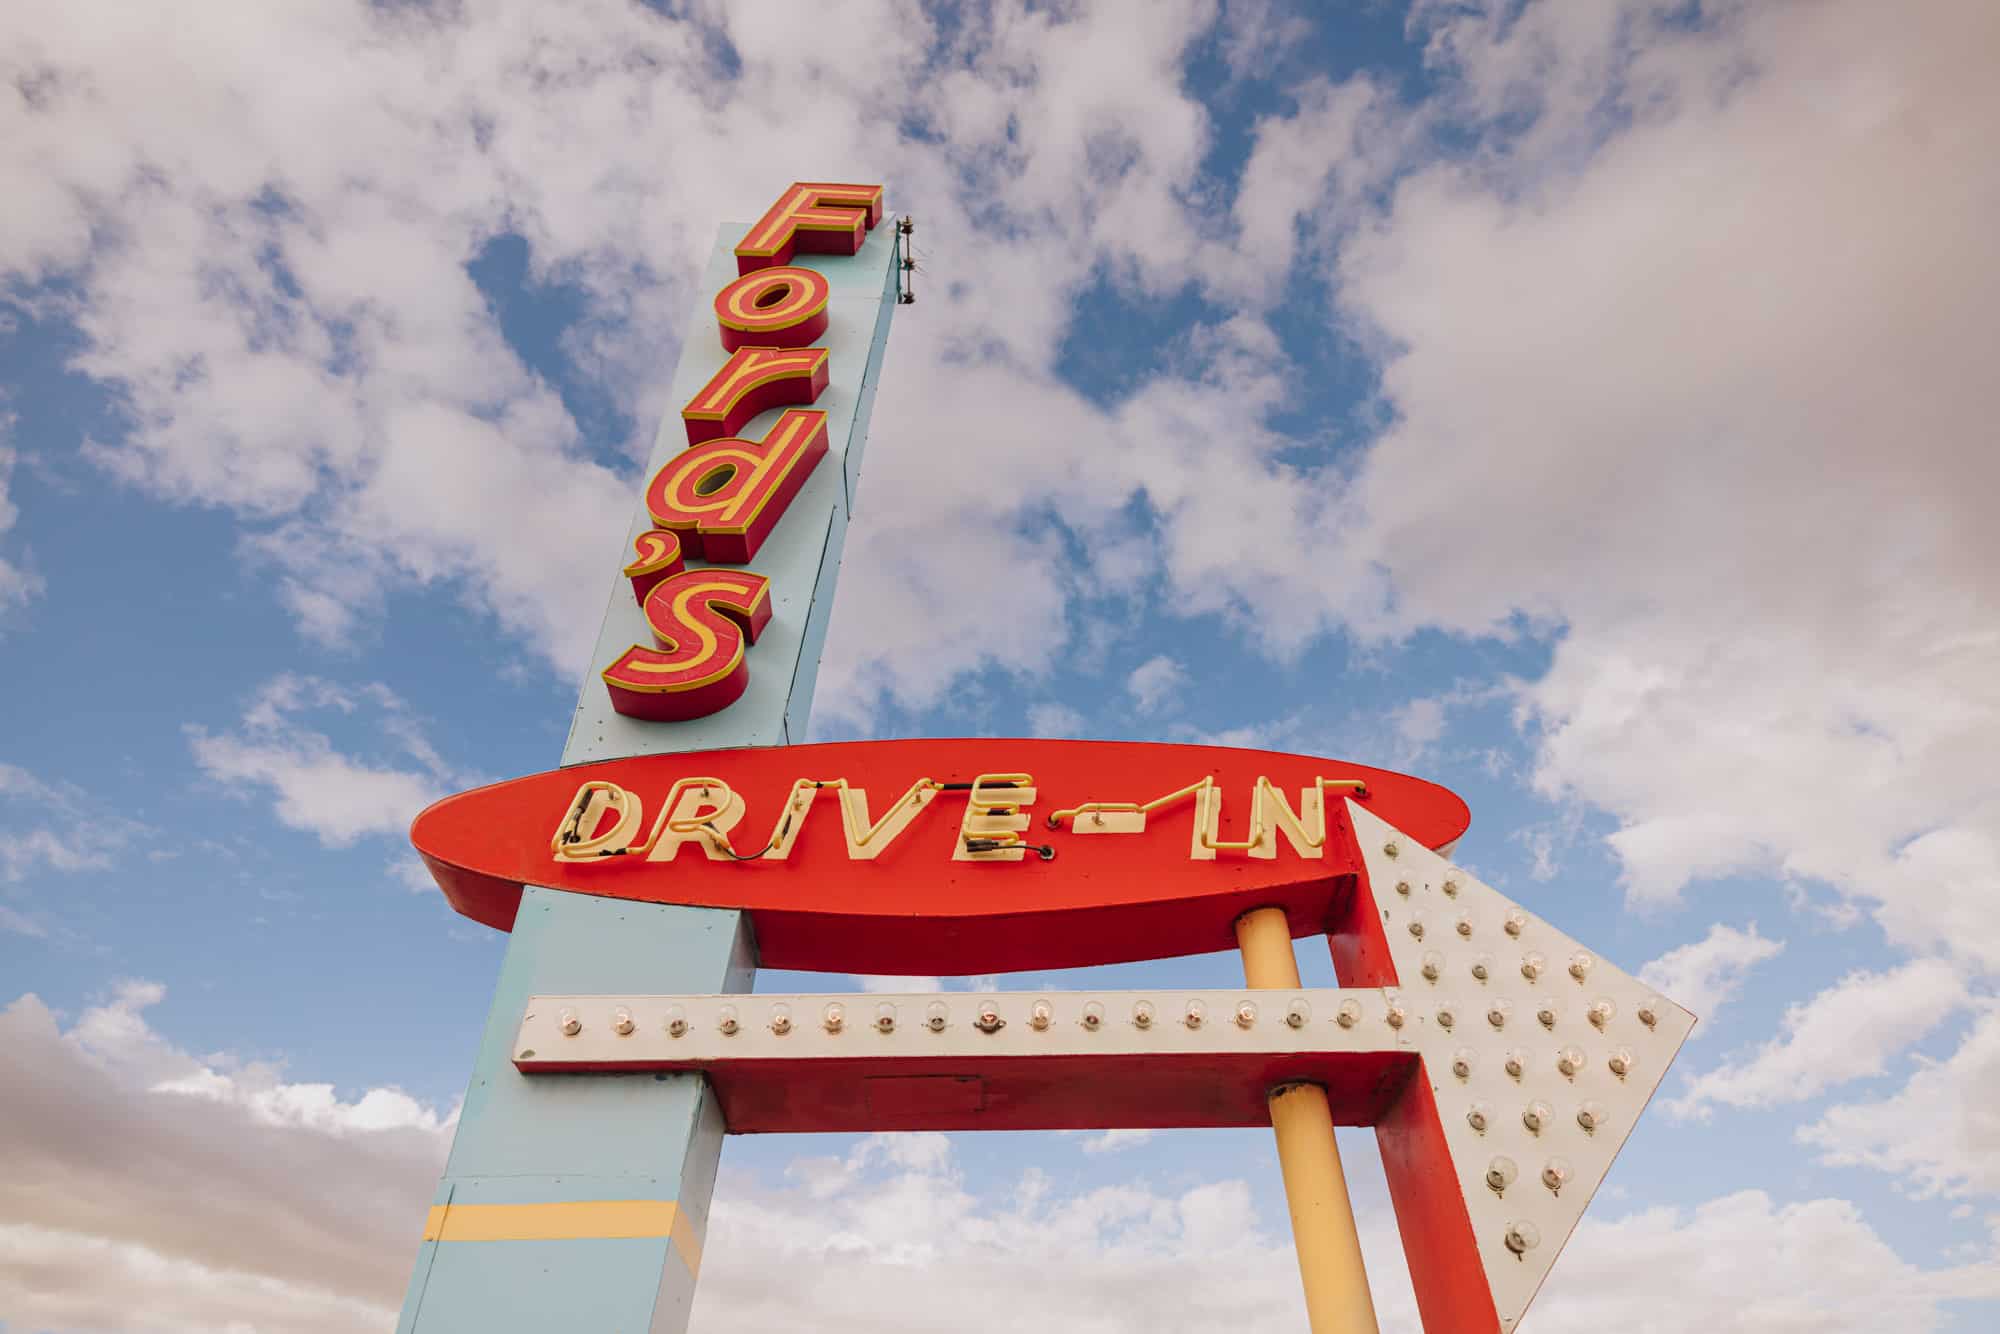 Ford's Drive-In in Great Falls